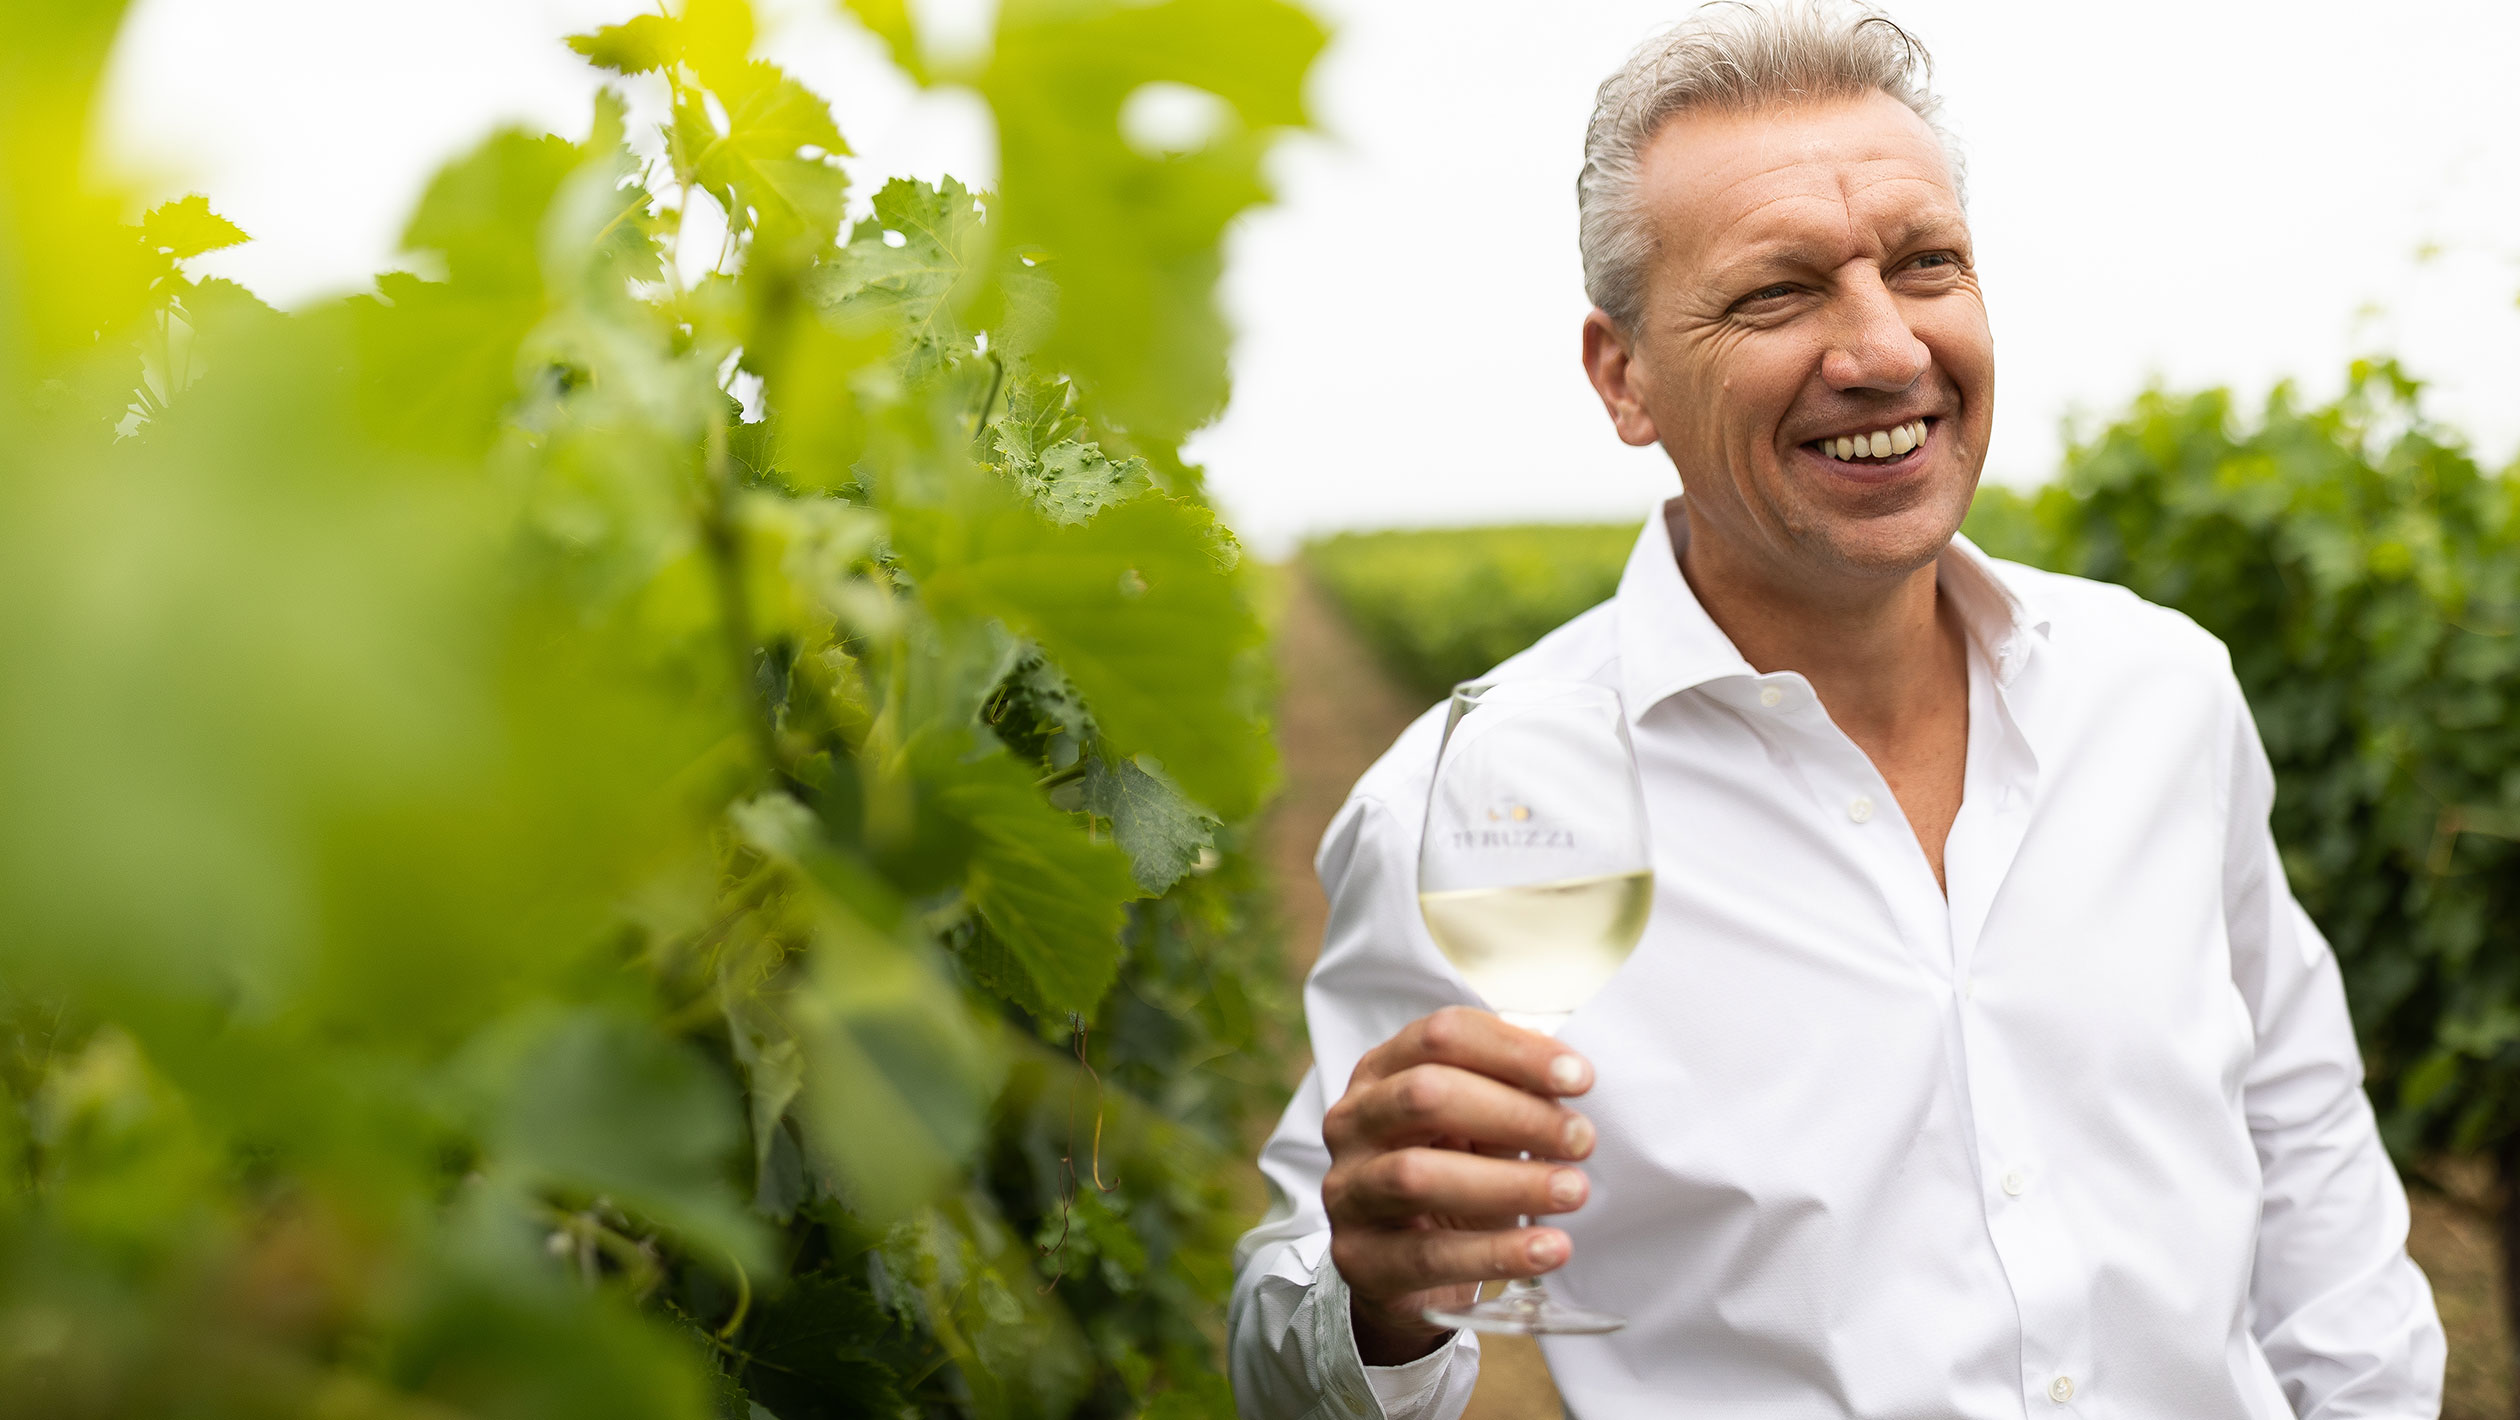 Alessio Gragnoli, general director of Teruzzi, poses in a vineyard with a glass of white wine